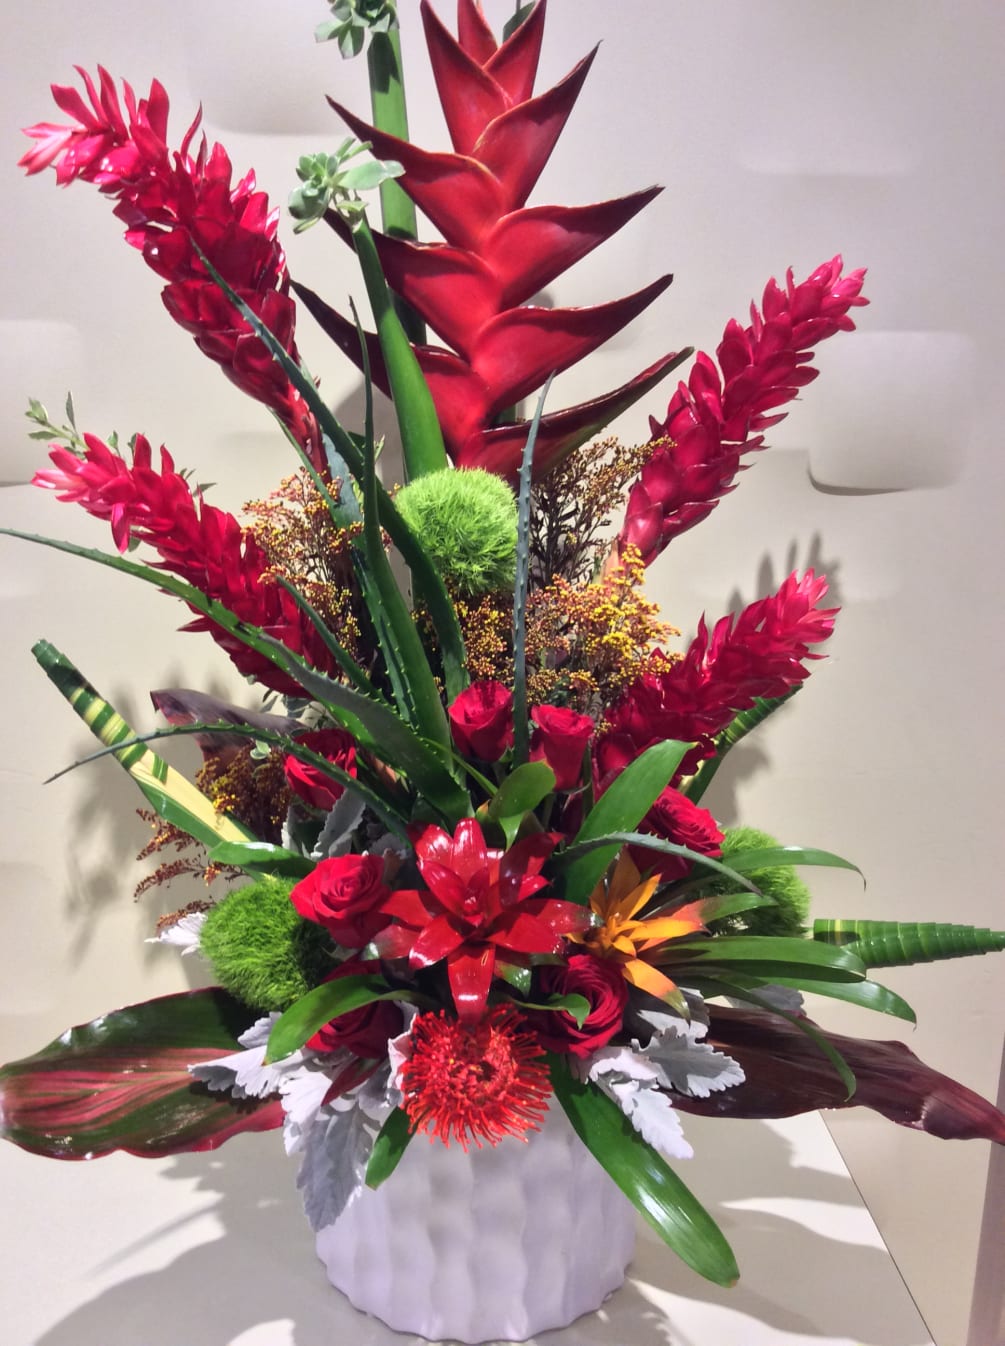 This collection of flowers from around the world , bromeliad ,orchids, ginger